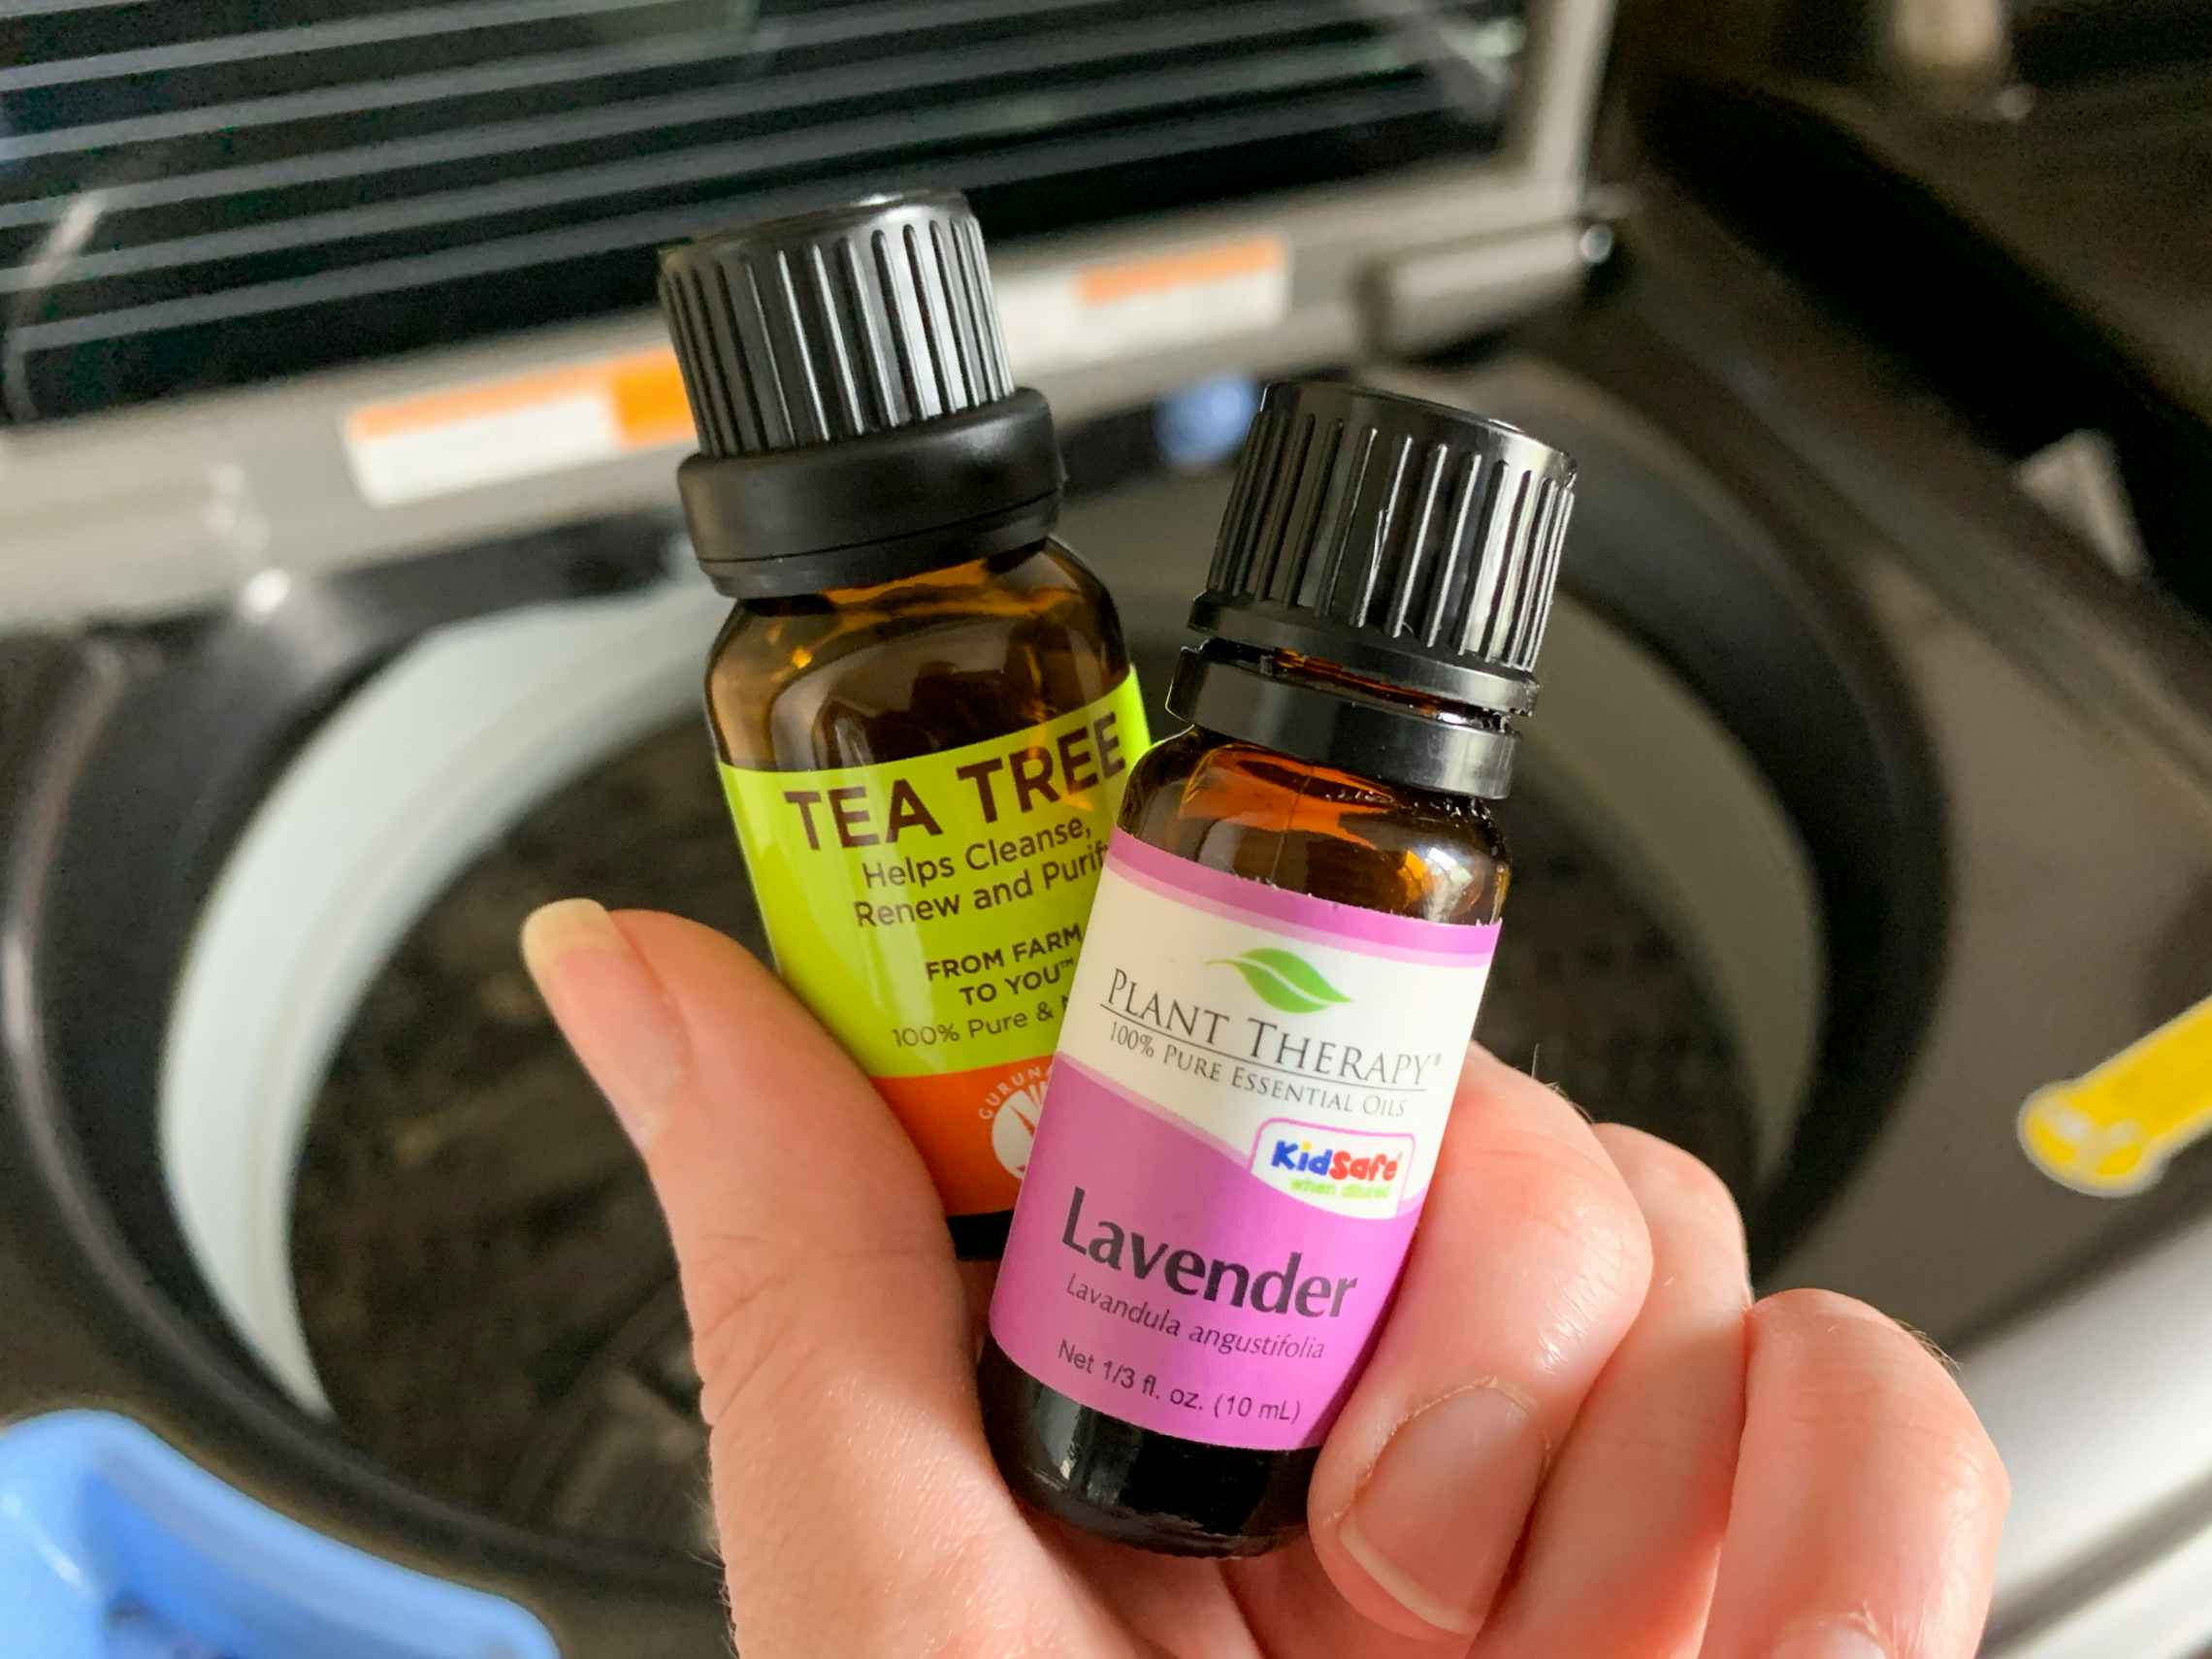 Tea Tree and Lavender essential oil bottles in front of a washing machine.